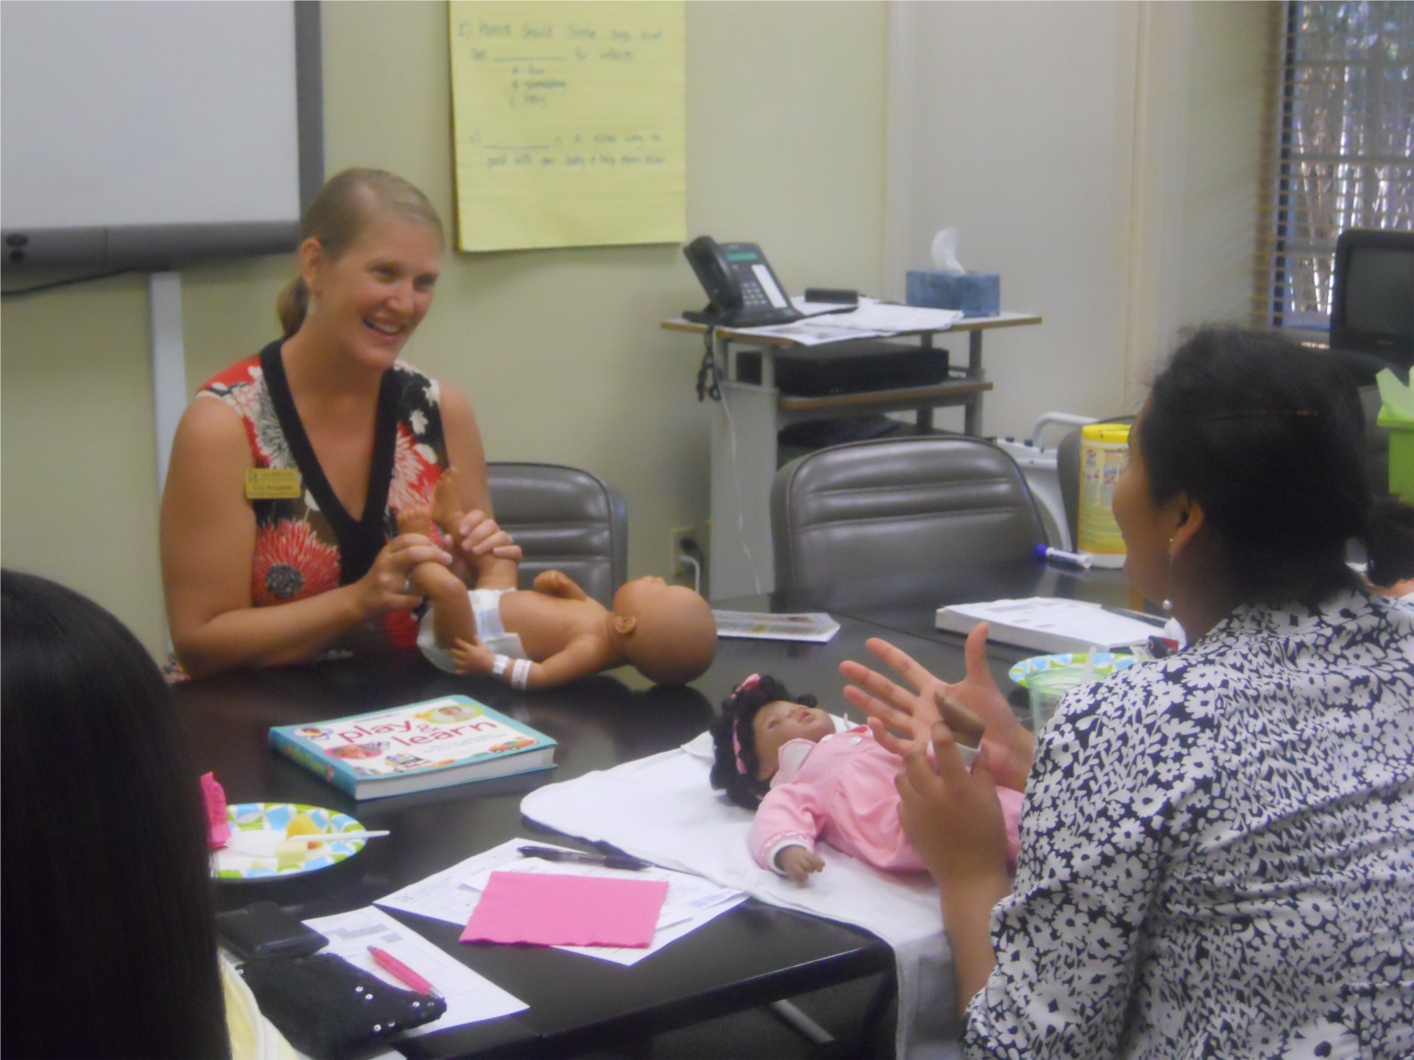 Parenting Education Instructor, Erin Stangland, (left) works one-on-one with a new mother to teach her how to care for her newborn.